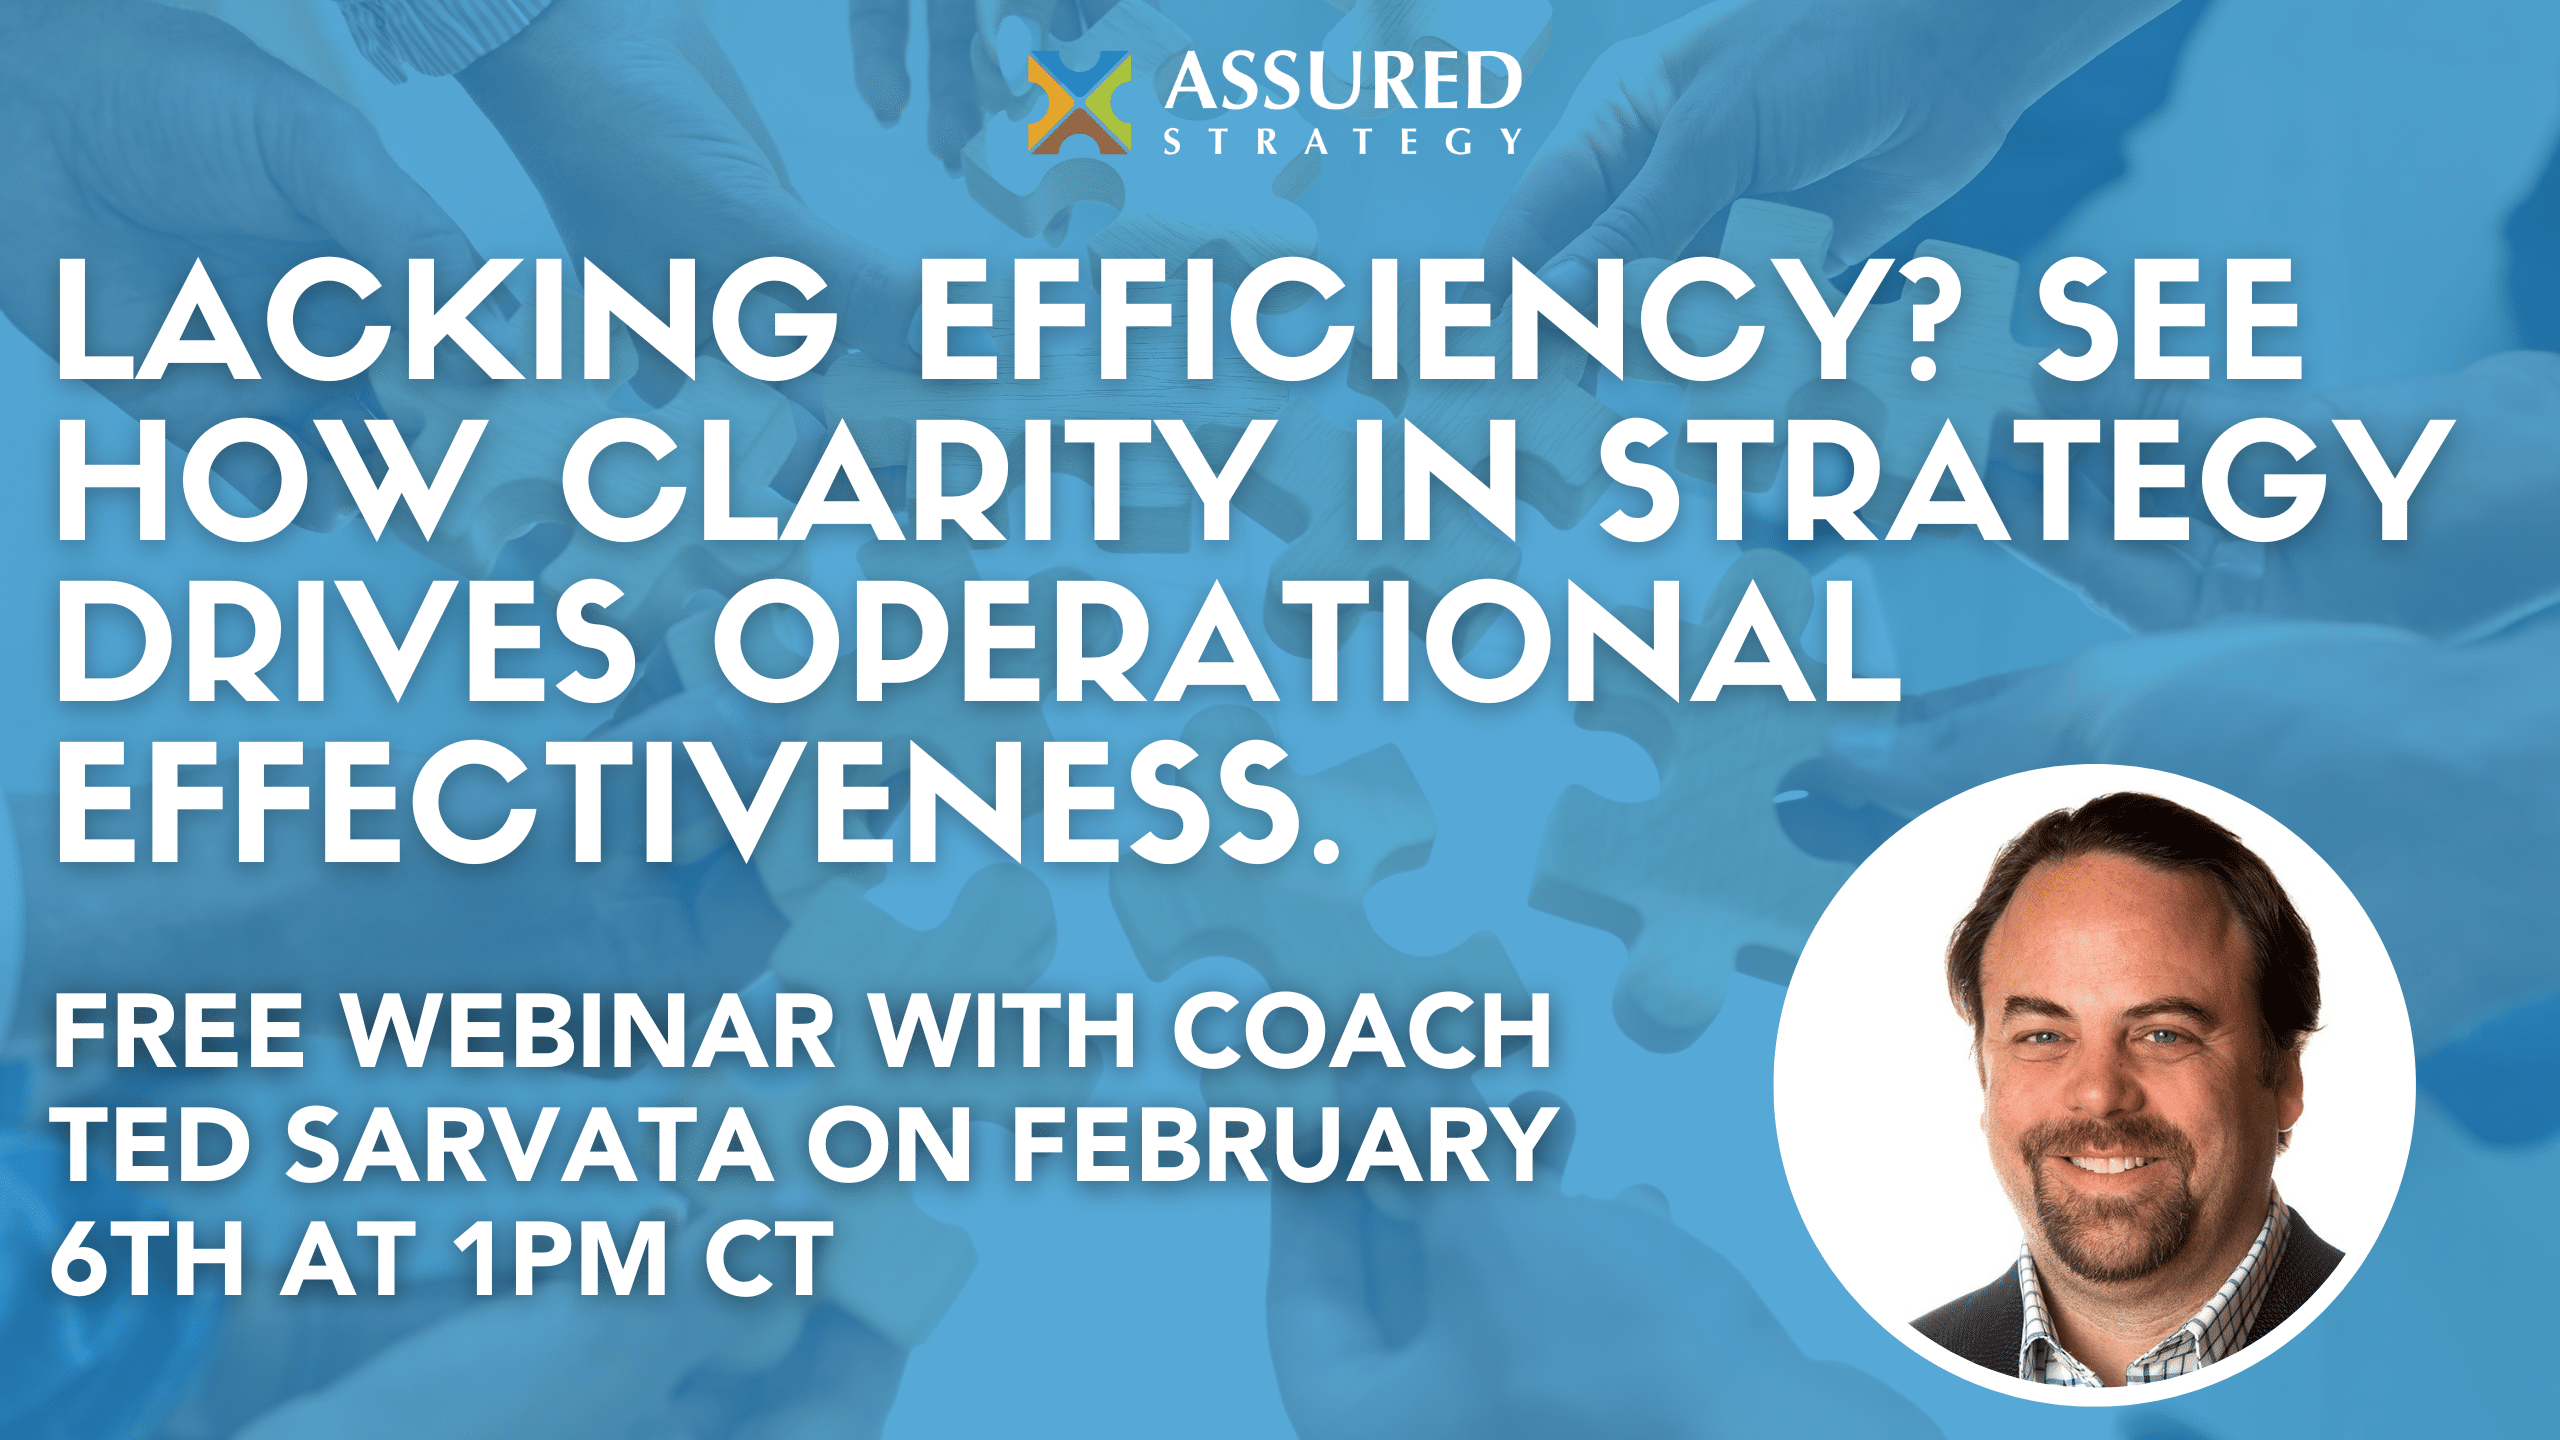 Free Webinar: Strategy and How It Relates to Operational Effectiveness – February 6th from 1-2pm CT